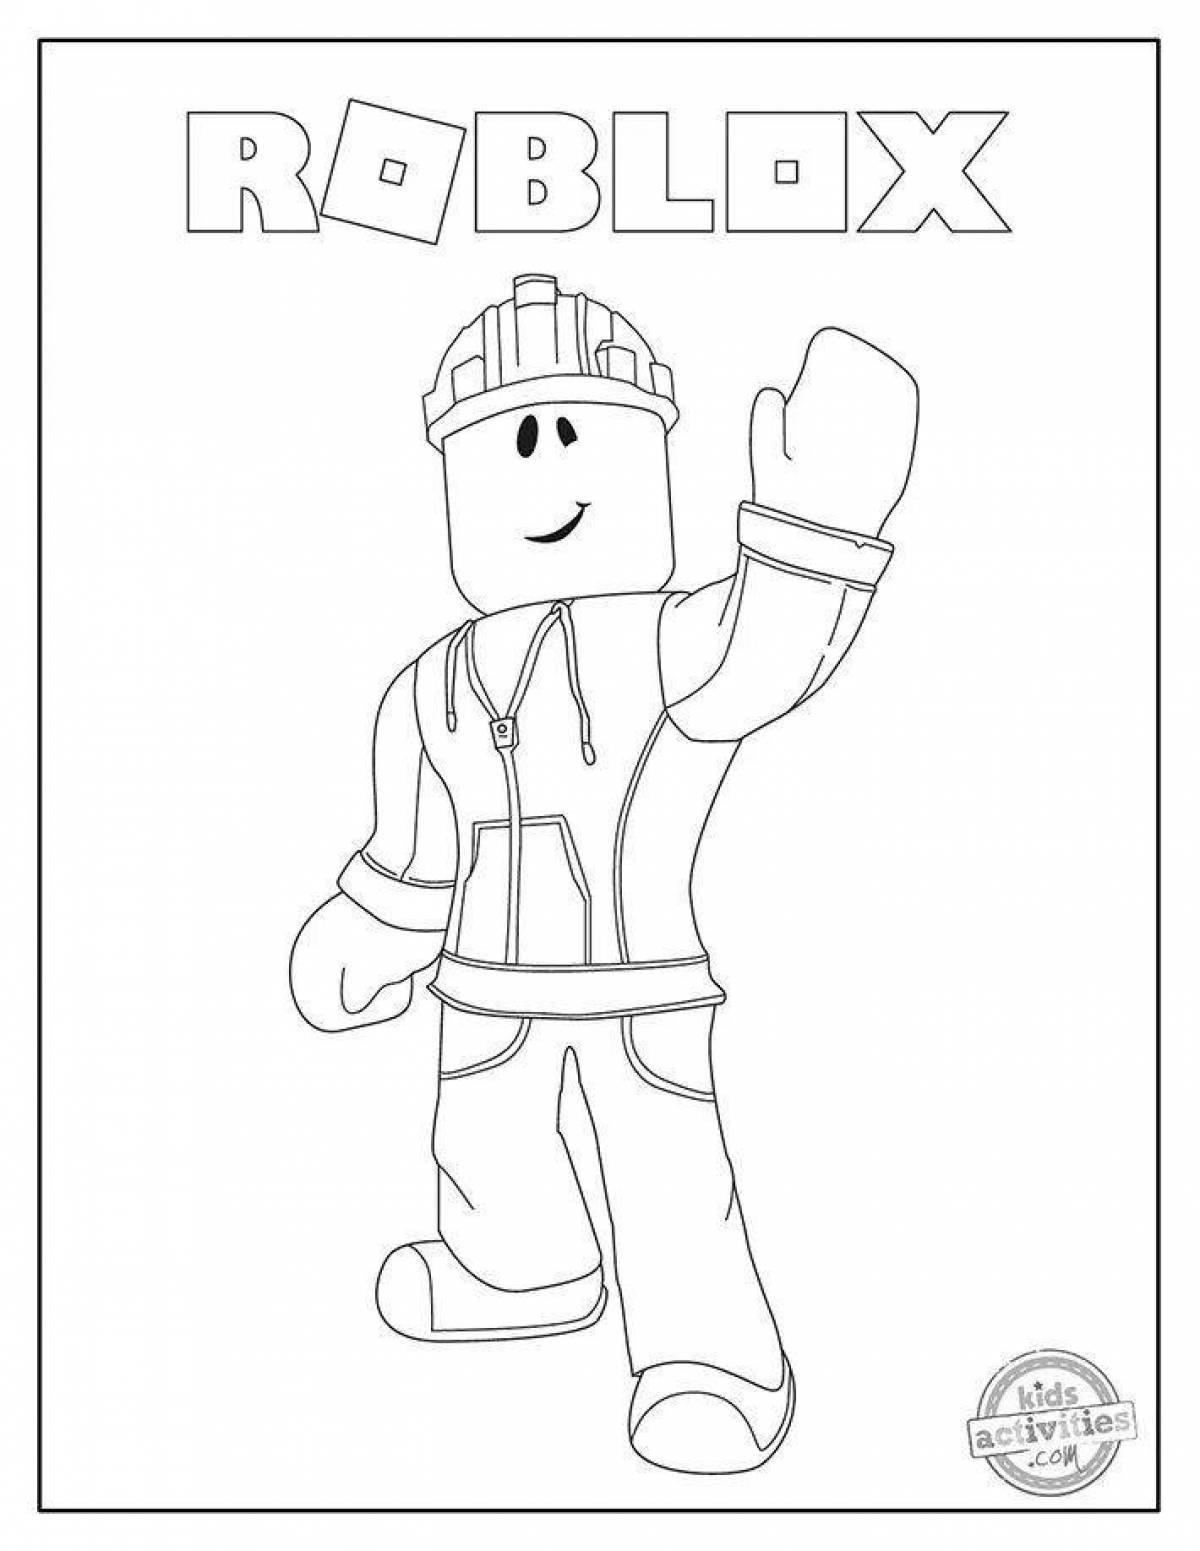 Color playful roblox robzi coloring page